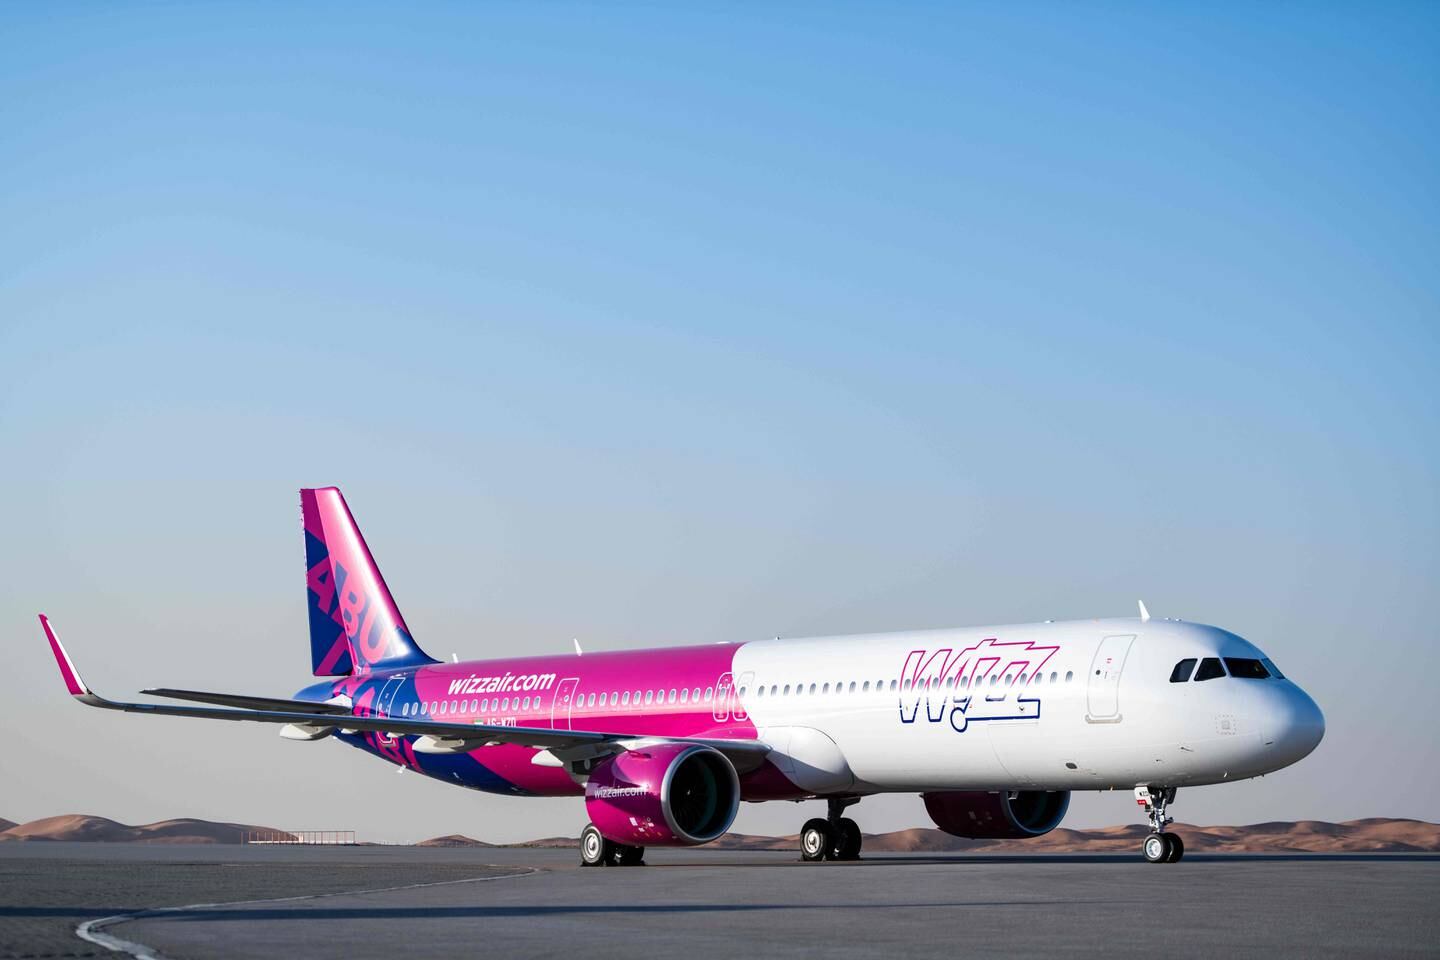 Wizz Air Abu Dhabi will be the only Middle Eastern airline operating the route to Mattala when it launches in the summer. Photo: Wizz Air Abu Dhabi